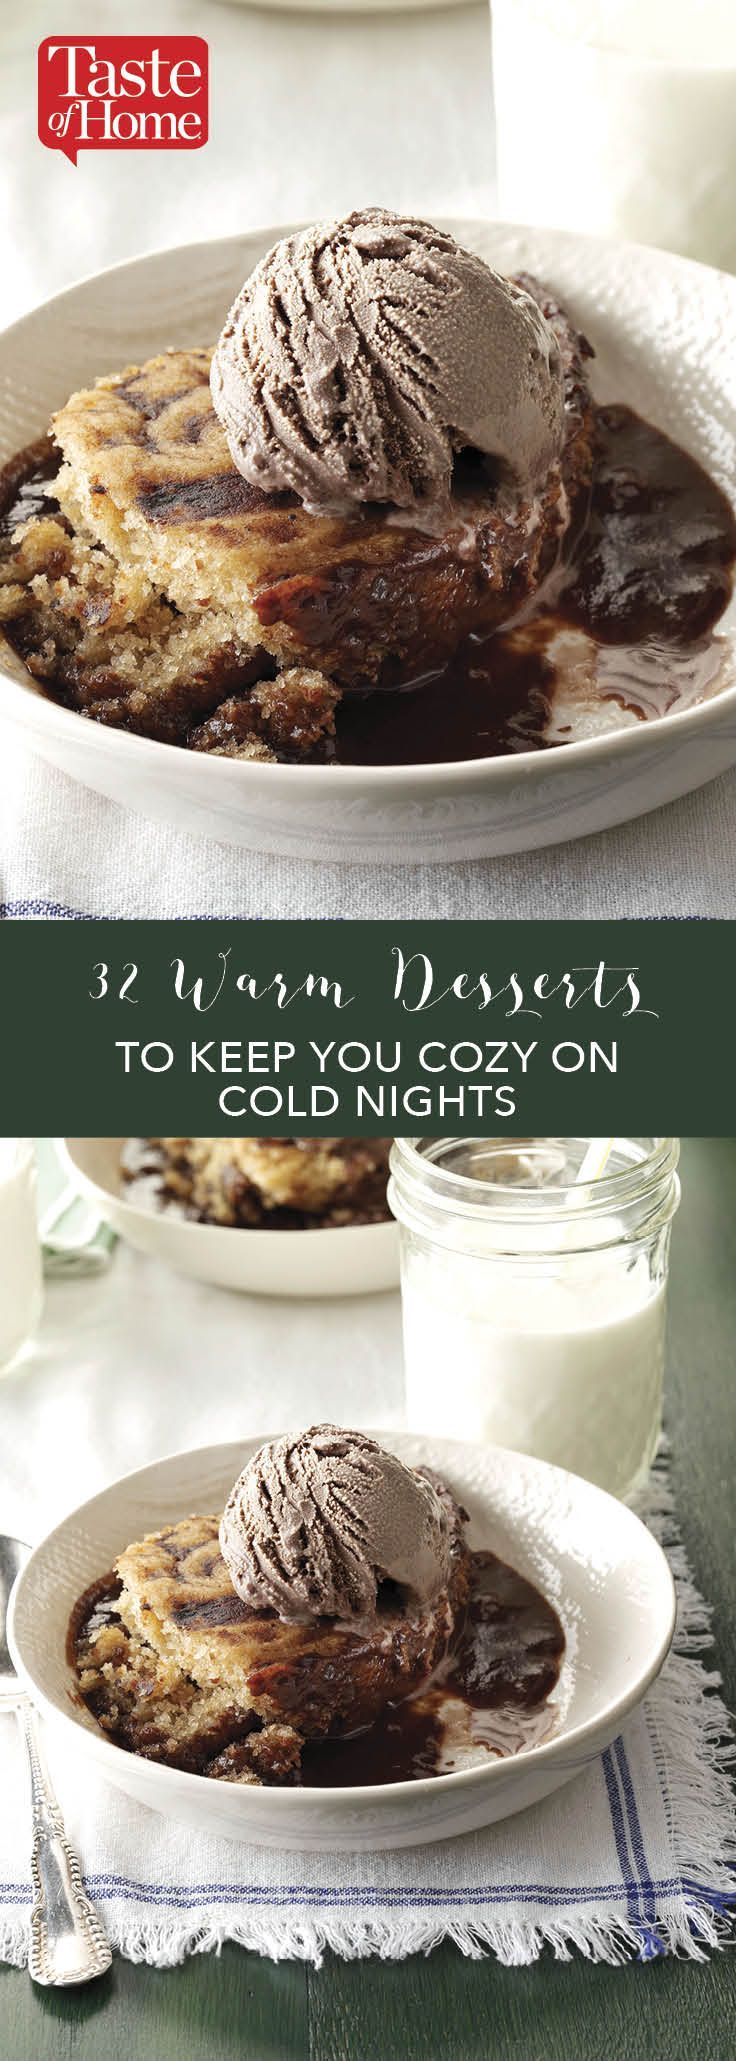 32 Warm Desserts to Keep You Cozy on Cold Nights -   14 desserts Winter warm ideas